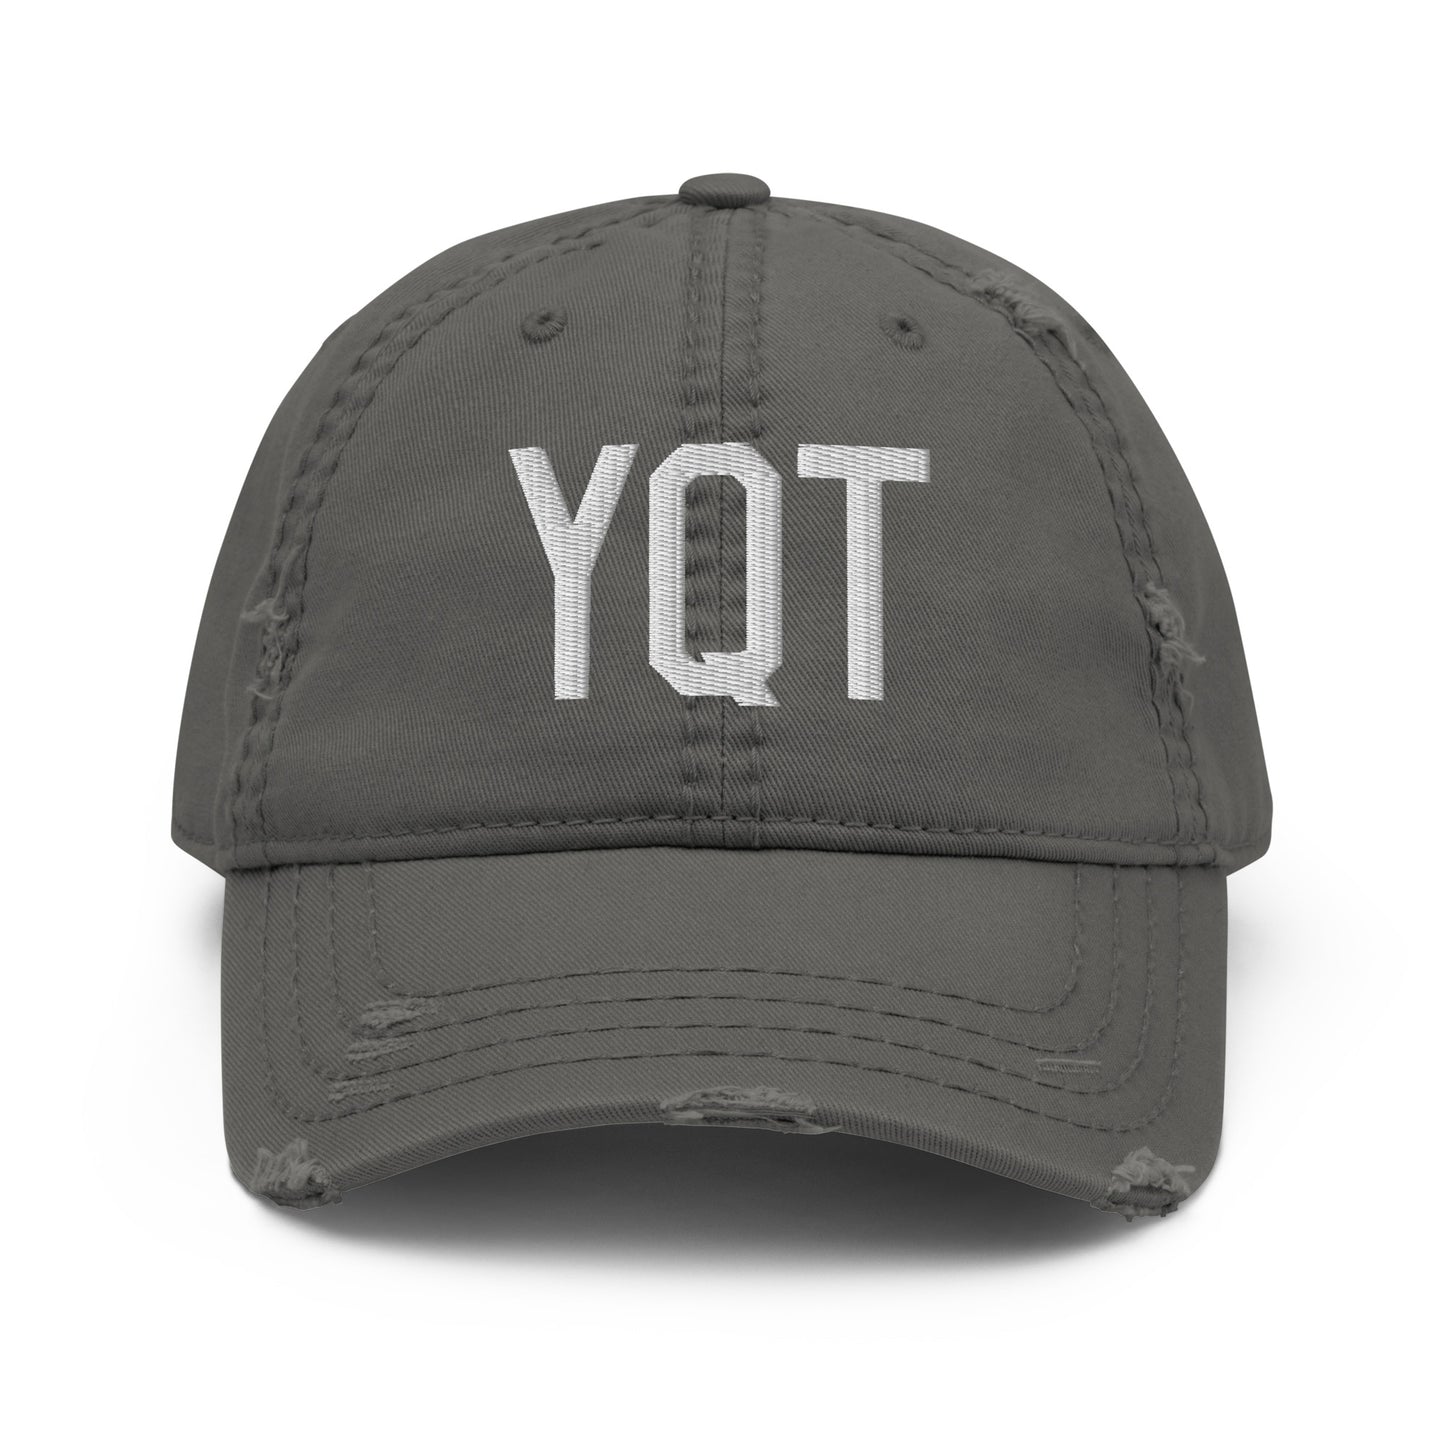 Airport Code Distressed Hat - White • YQT Thunder Bay • YHM Designs - Image 15